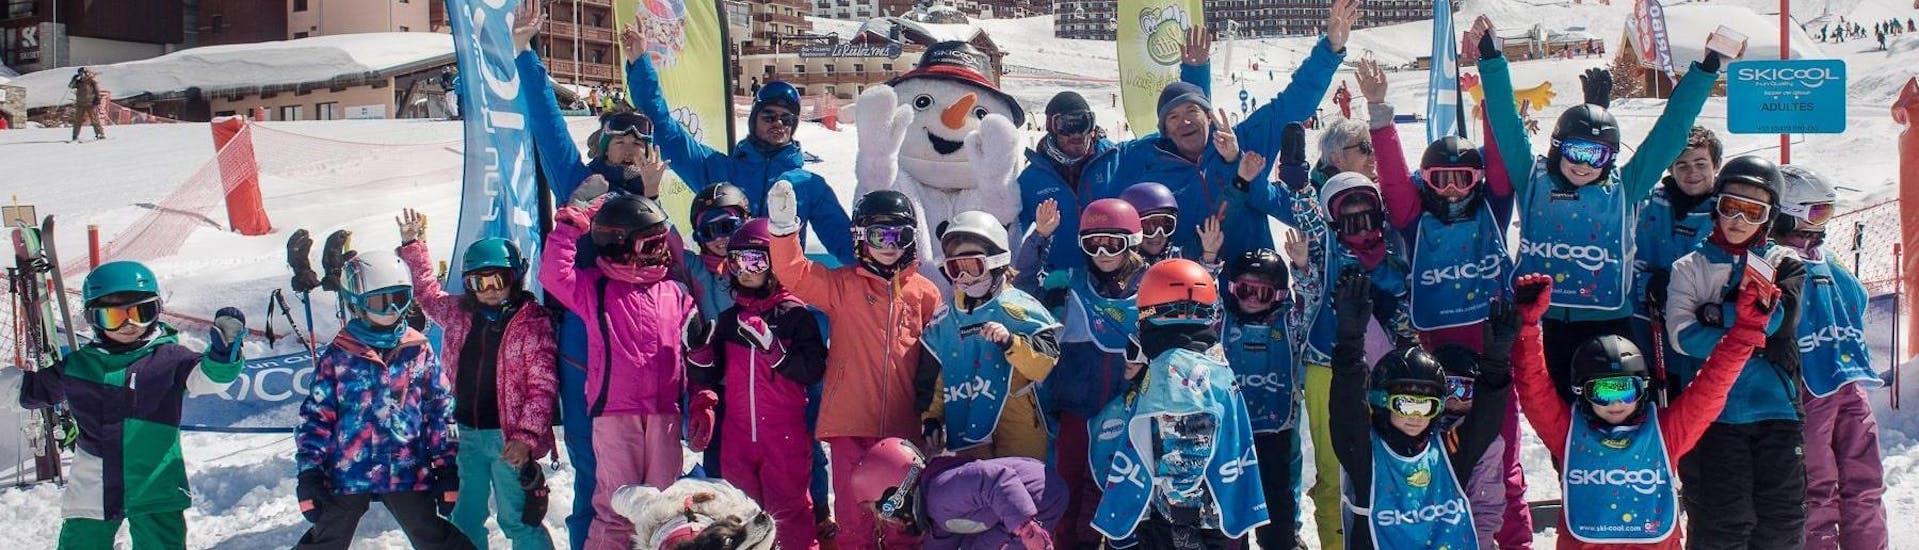 A group of kids is excited to start their ski lessons with the ski school Ski Cool in the ski resort of Val Thorens.